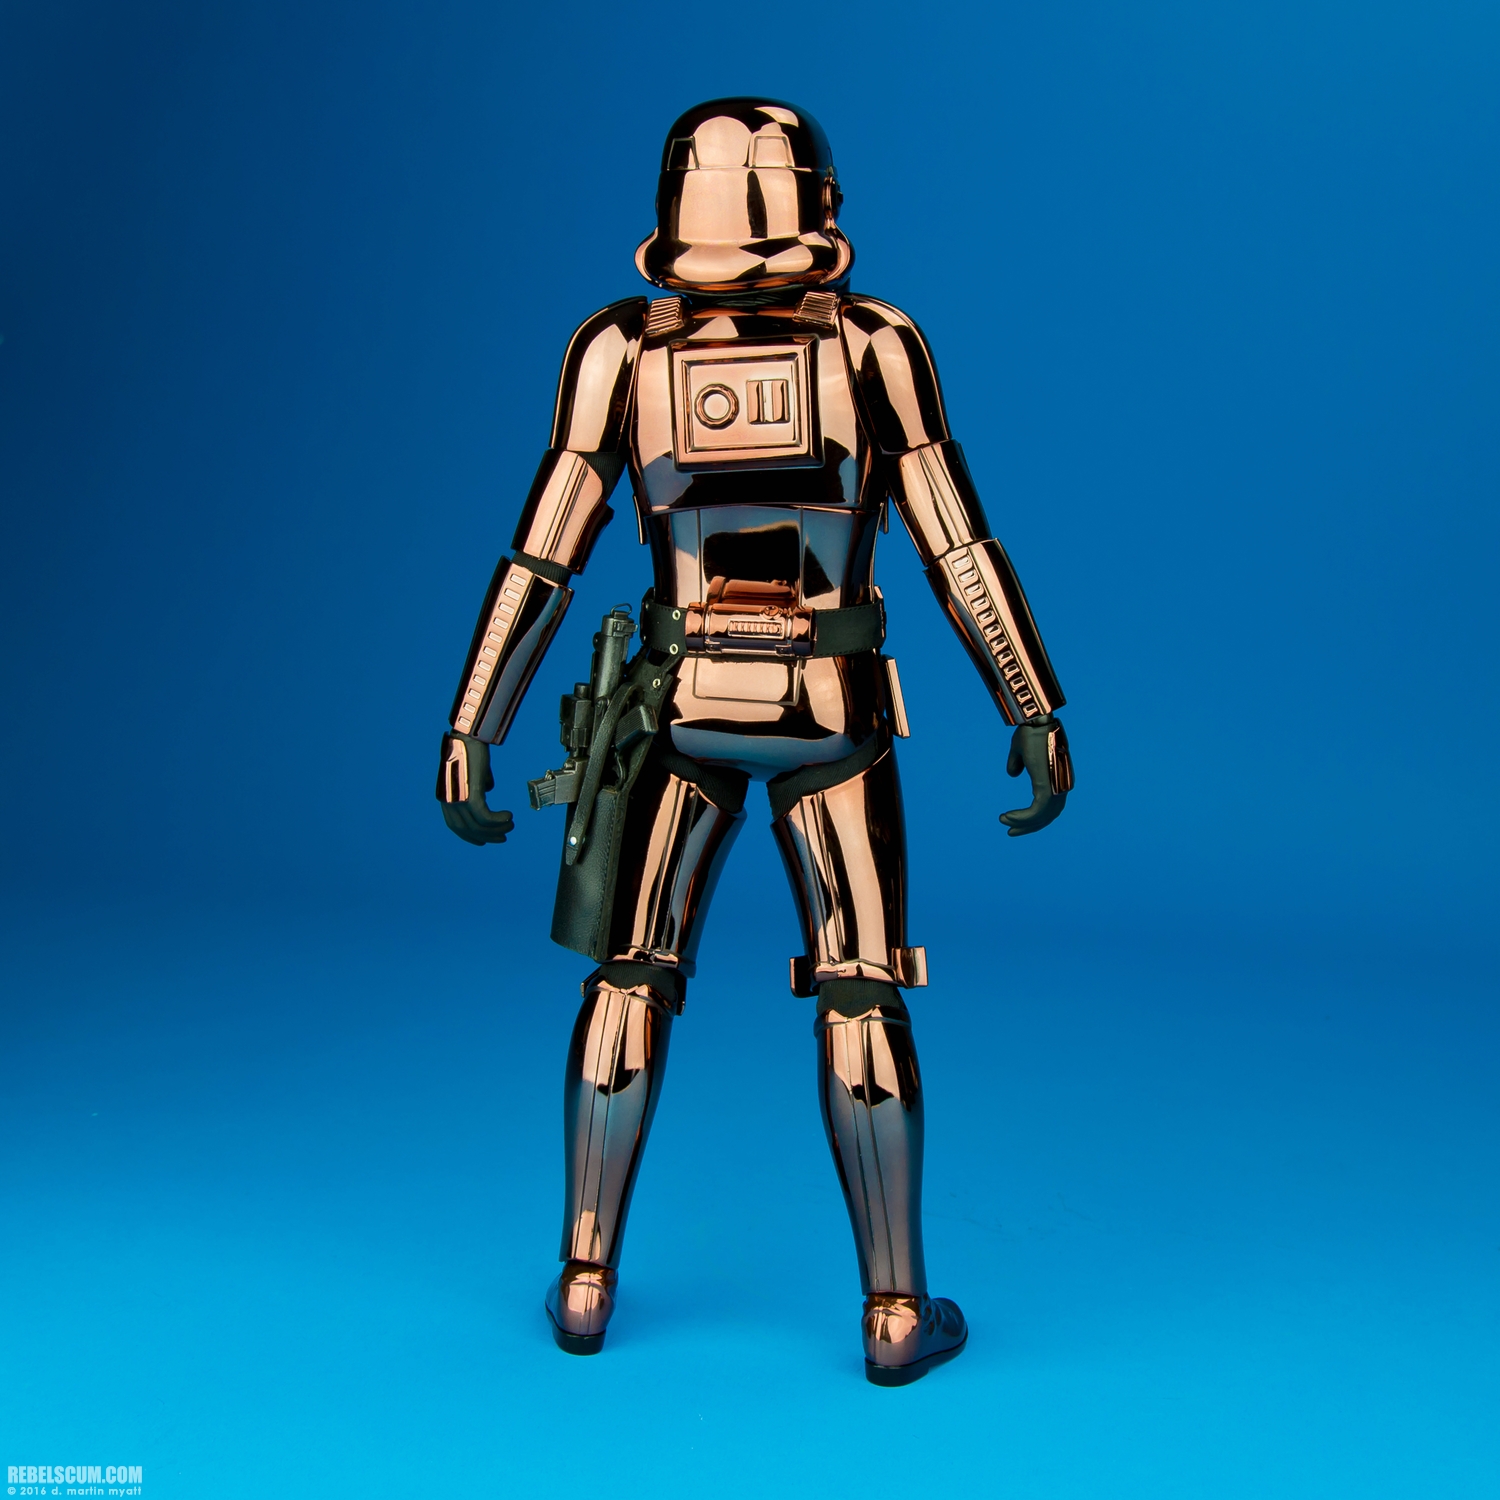 Hot-Toys-MMS330-Copper-Chrome-Stromtrooper-Collectible-Figure-004.jpg